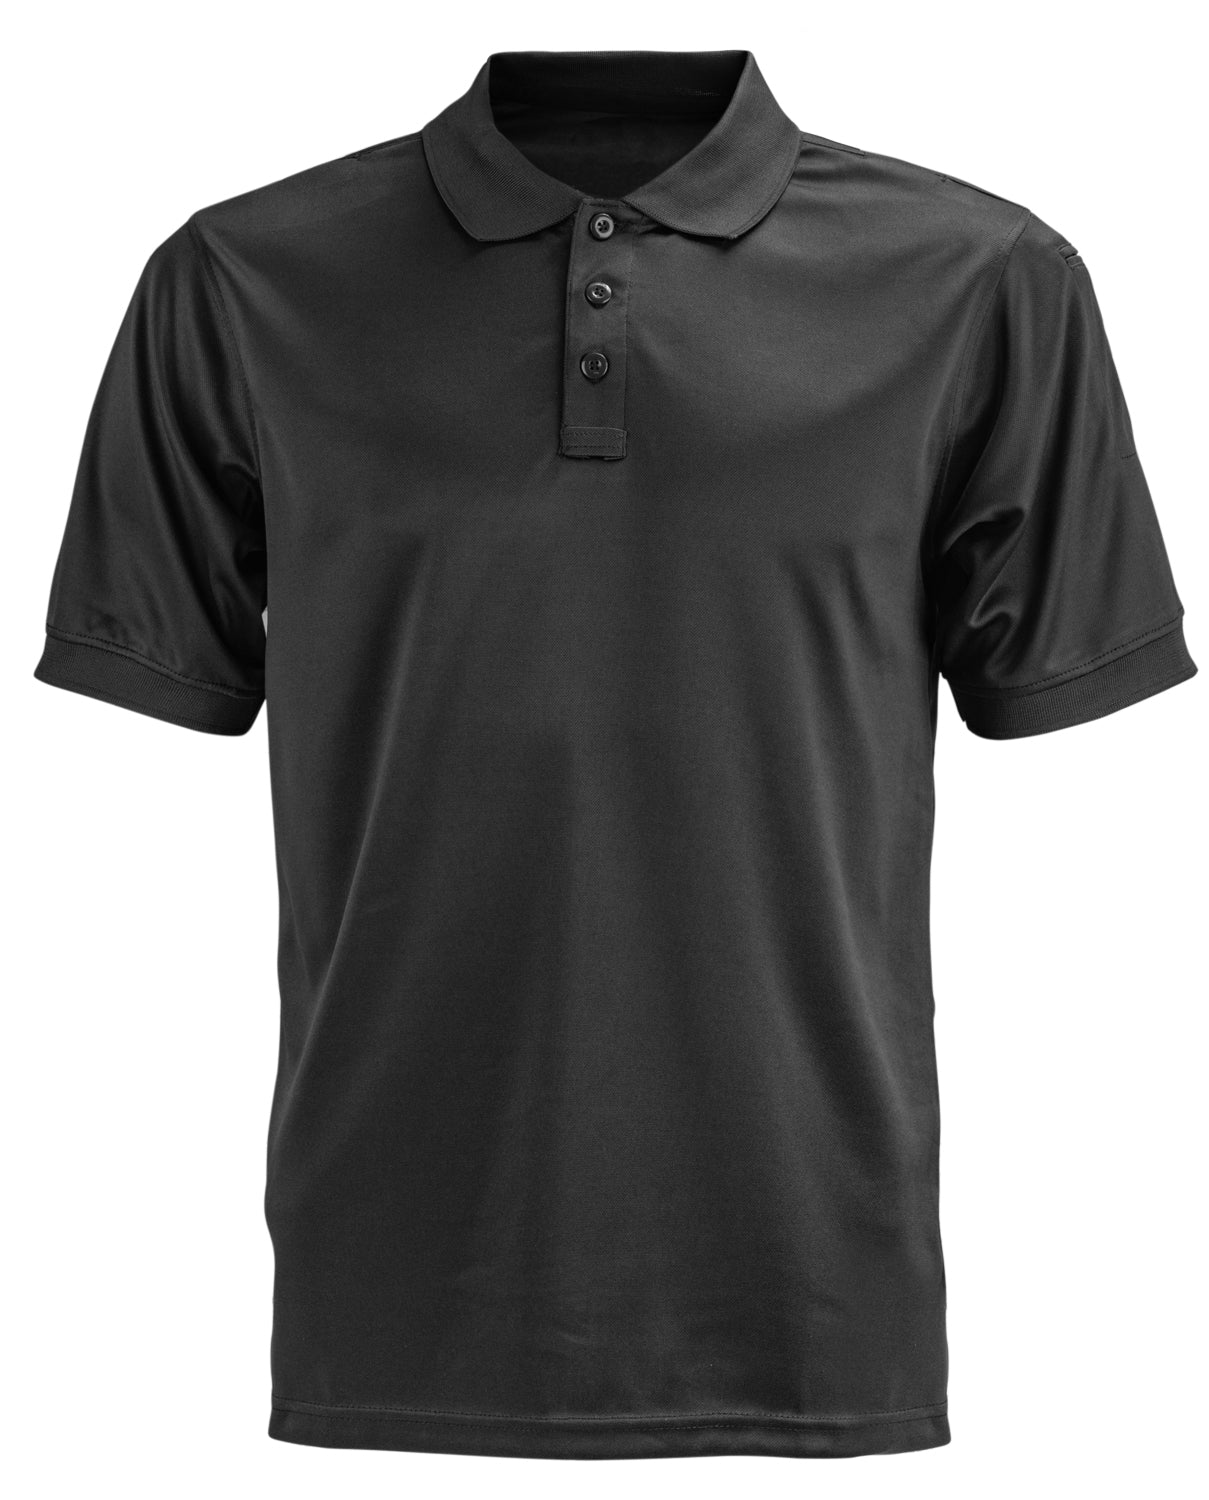 100% POLYESTER TACTICAL PERFORMANCE POLO SHIRT – First Class Uniforms